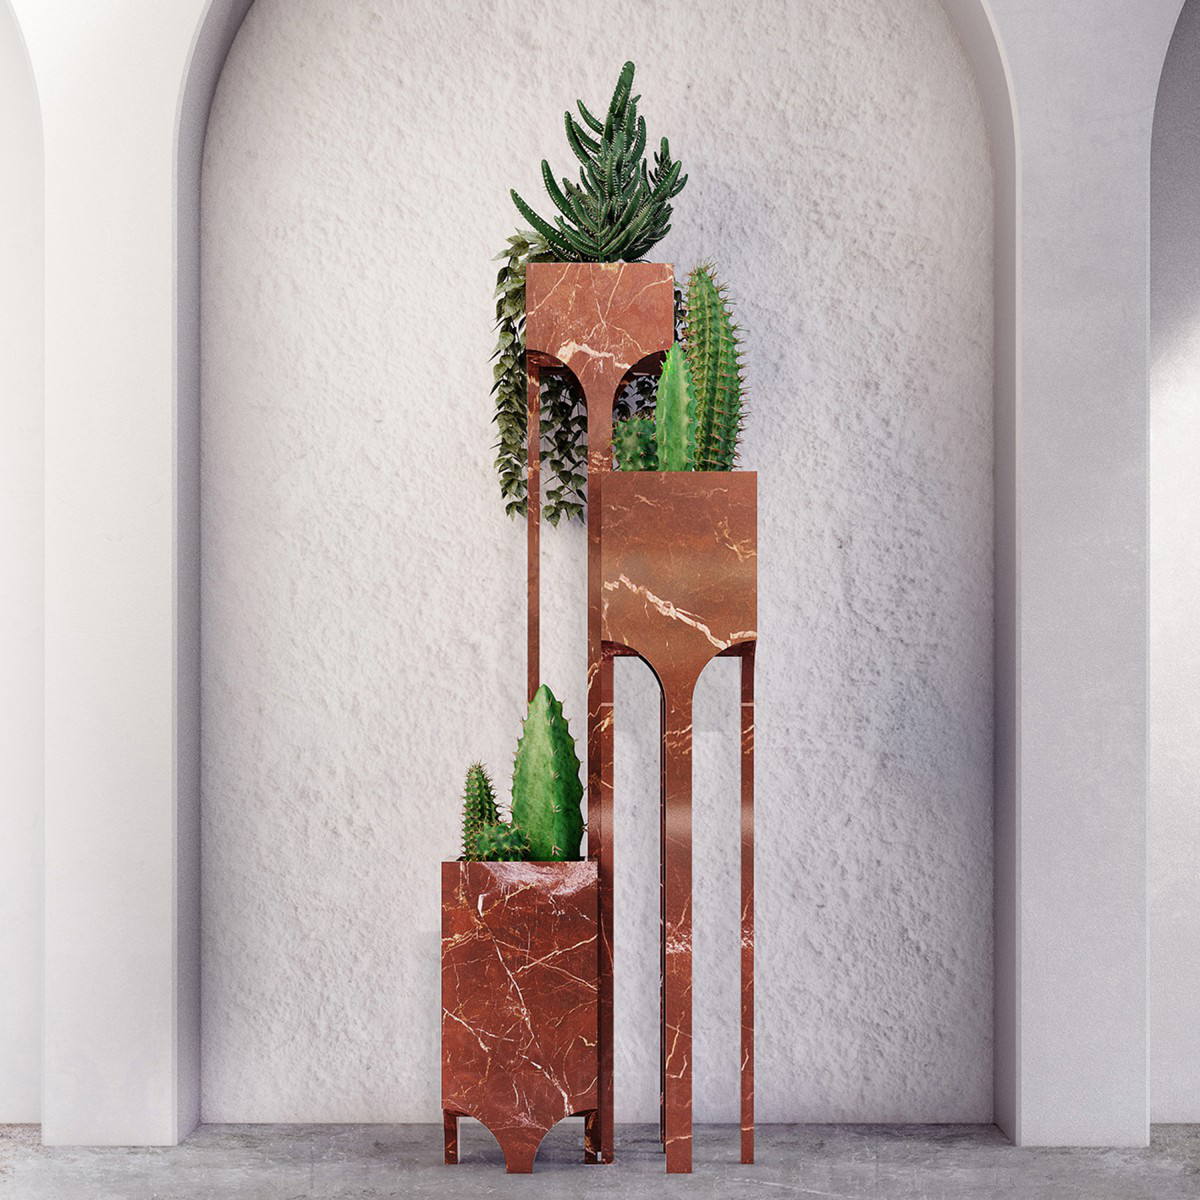 Heritage Collection Planter and Tables by Alexis Cogul Lleonart